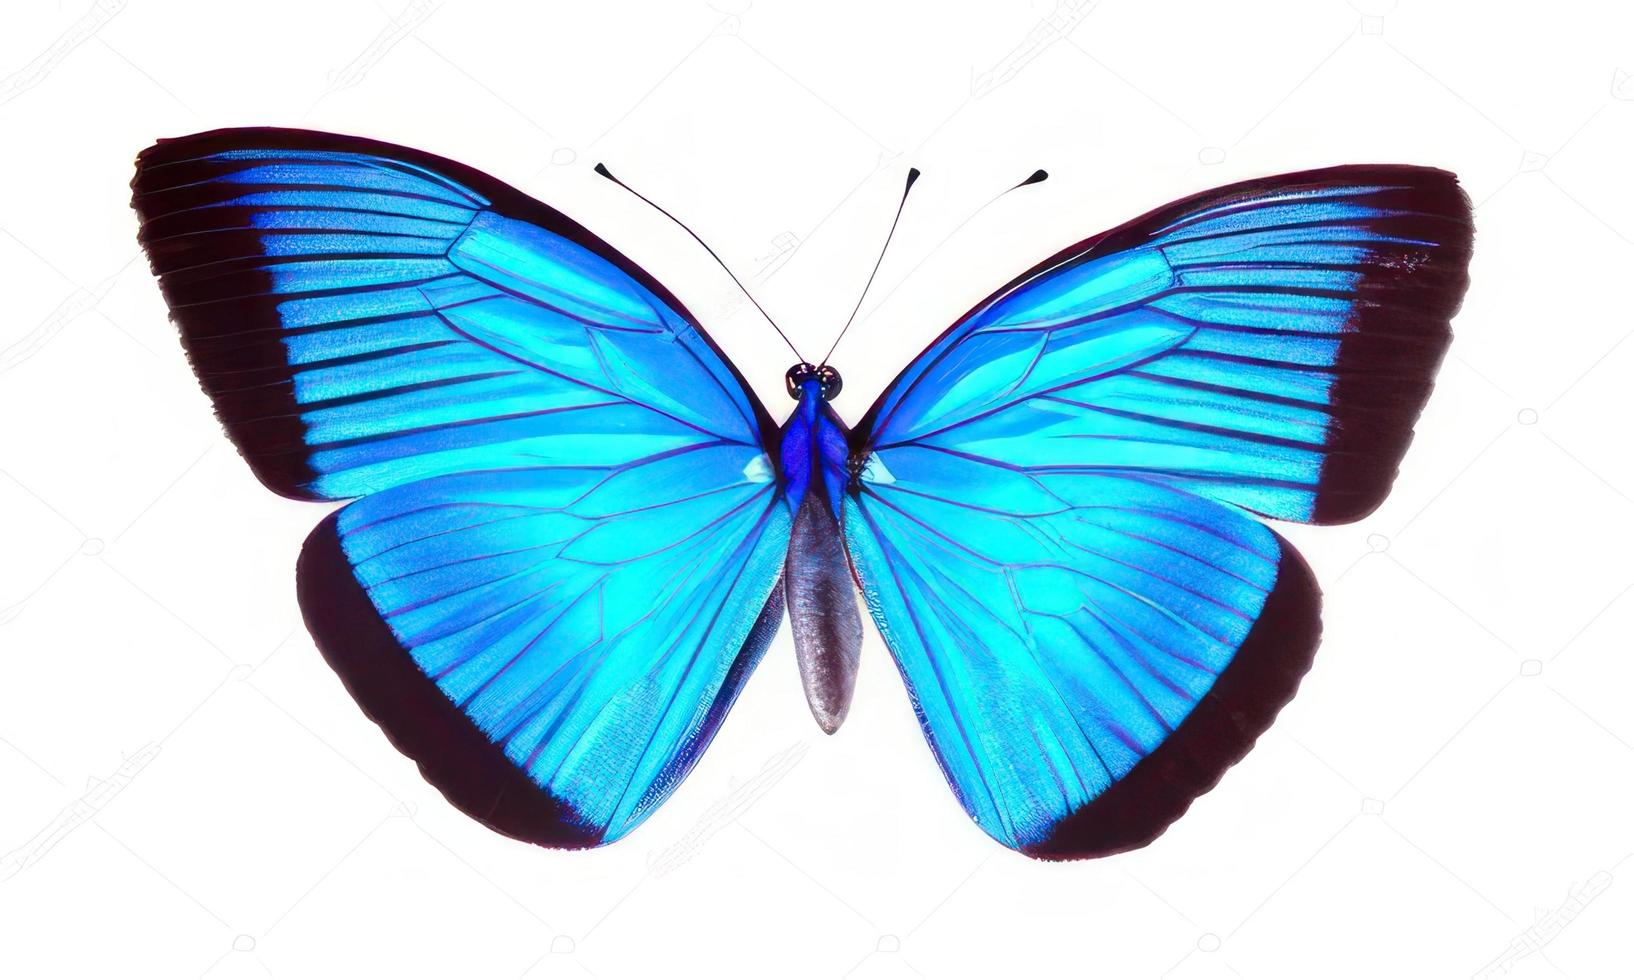 blue butterfly on white background photo